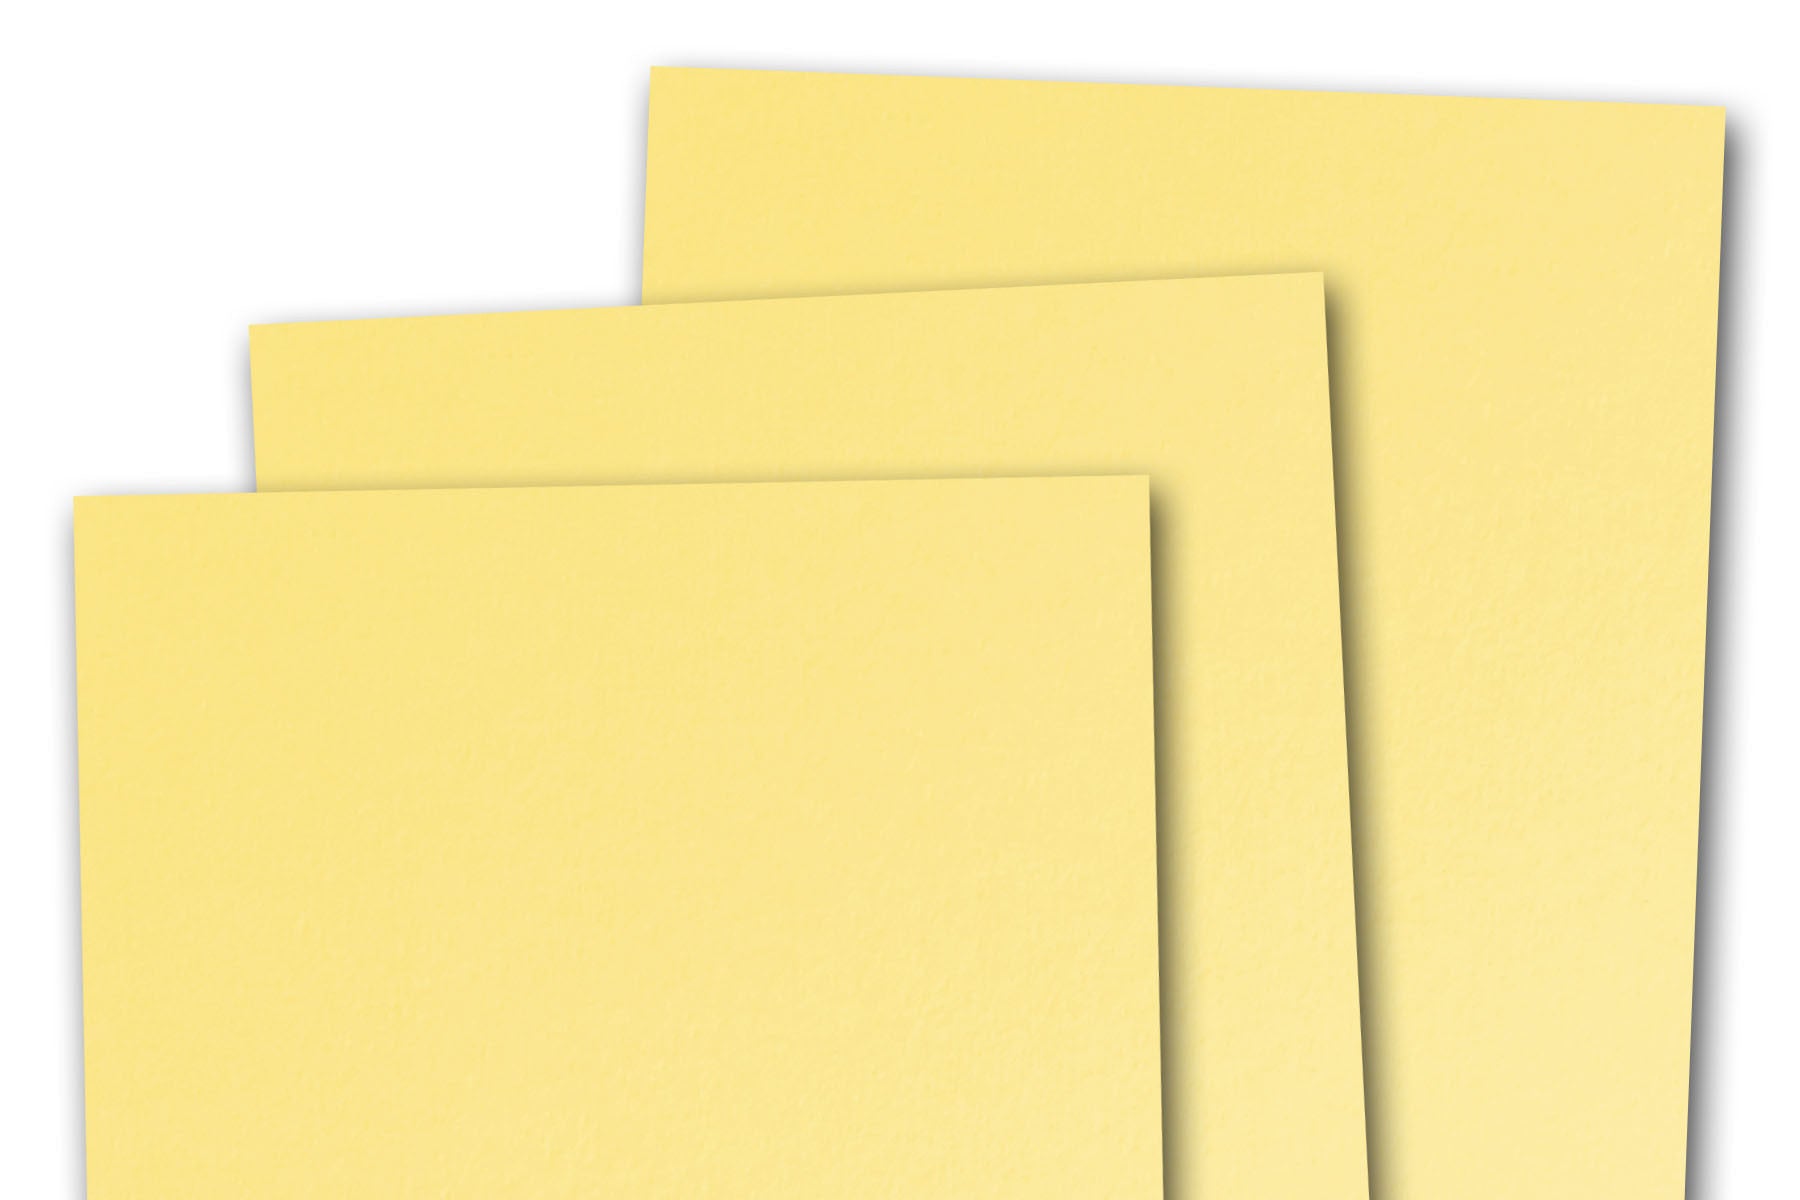 Light Yellow 11-x-17 BASIS Paper, 100 per package, 216 GSM (80lb